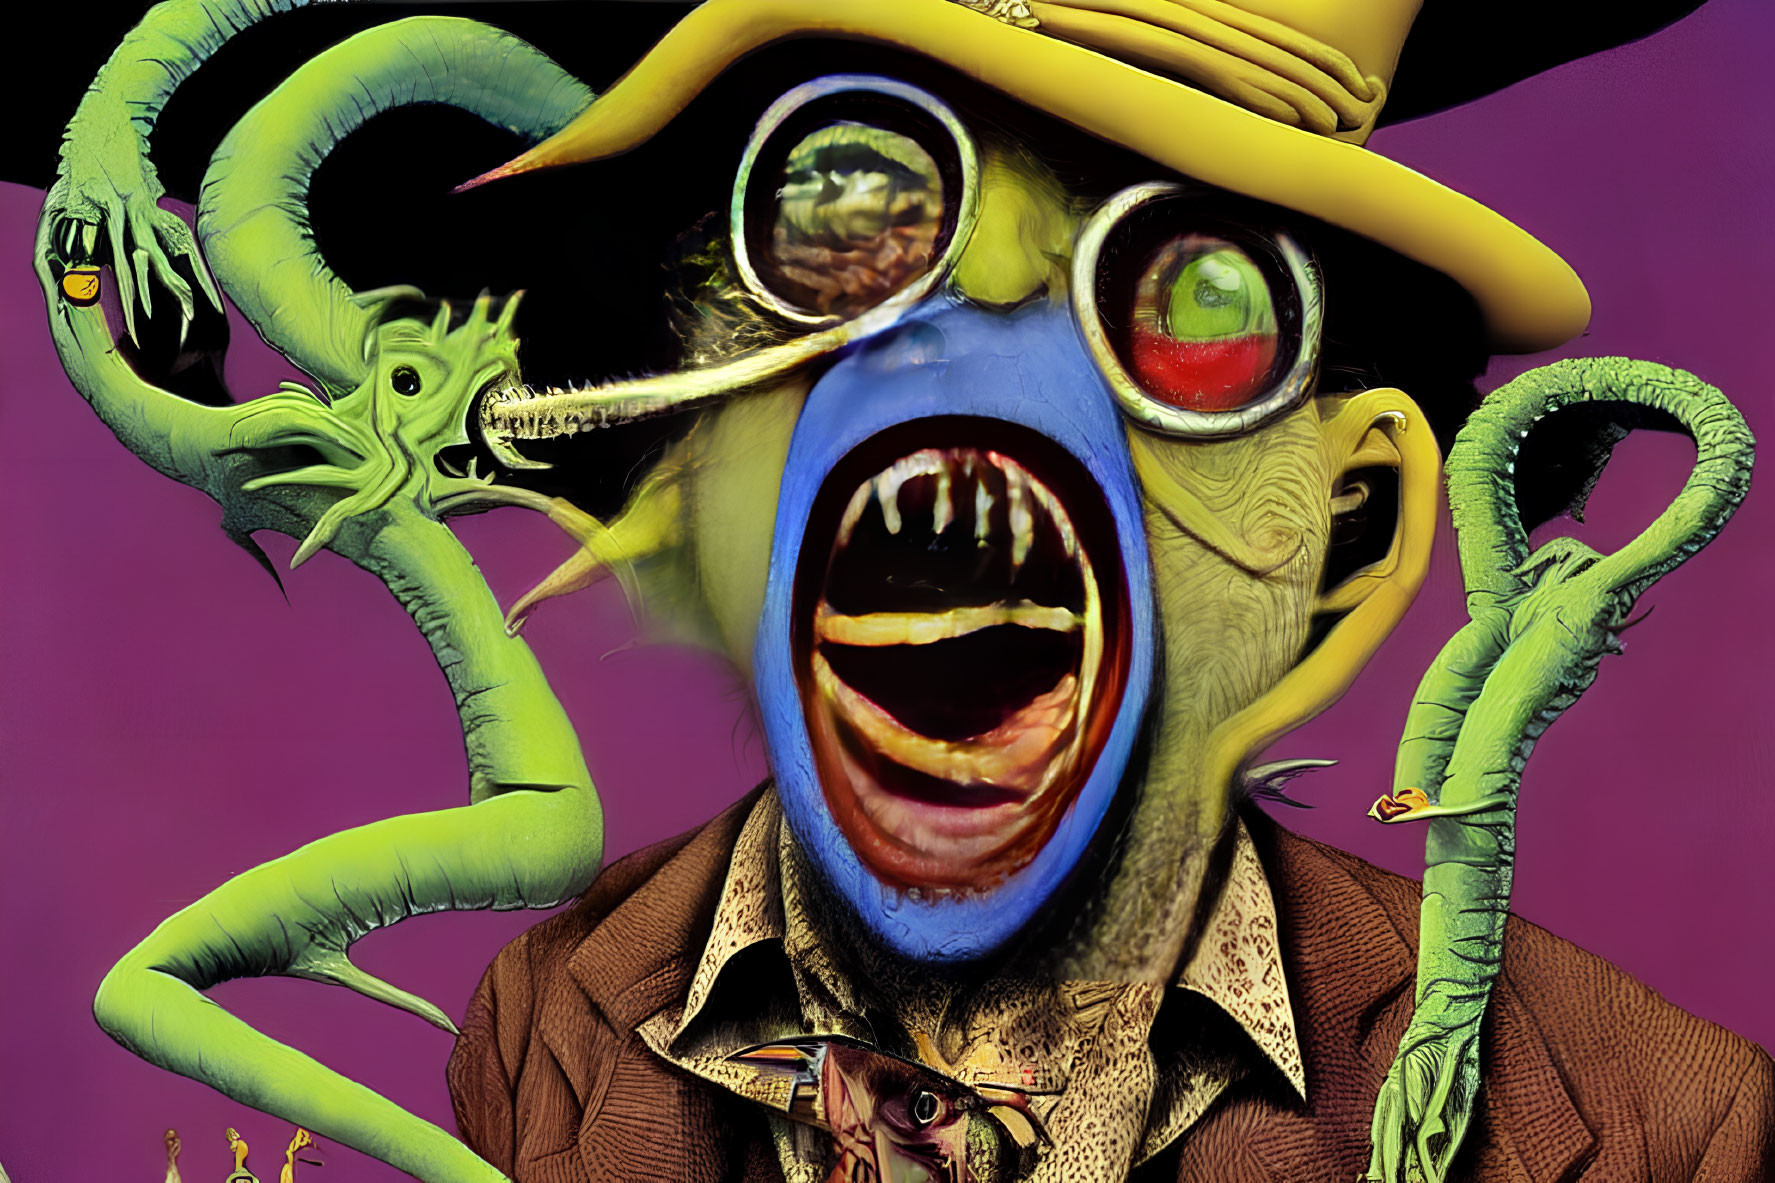 Colorful surreal humanoid figure with multiple eyes and snakelike appendages